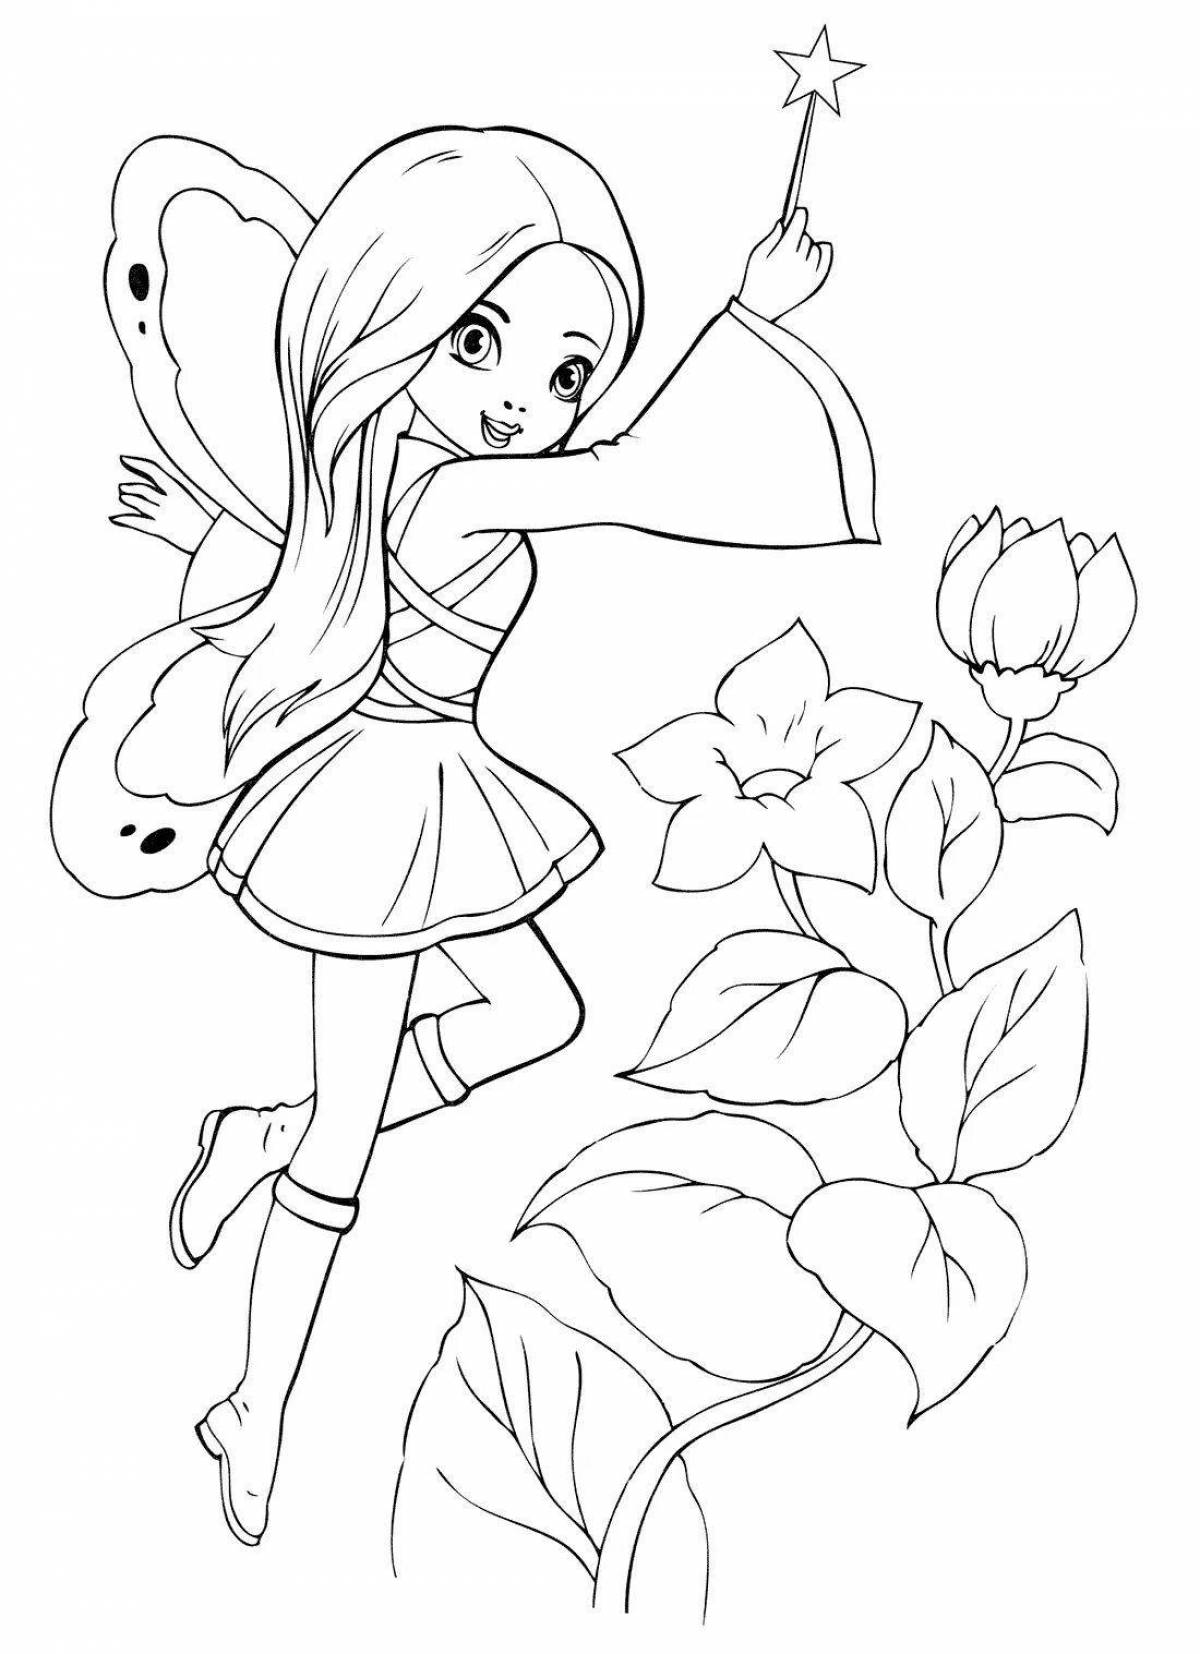 Fairytale coloring book for 9 year old girls